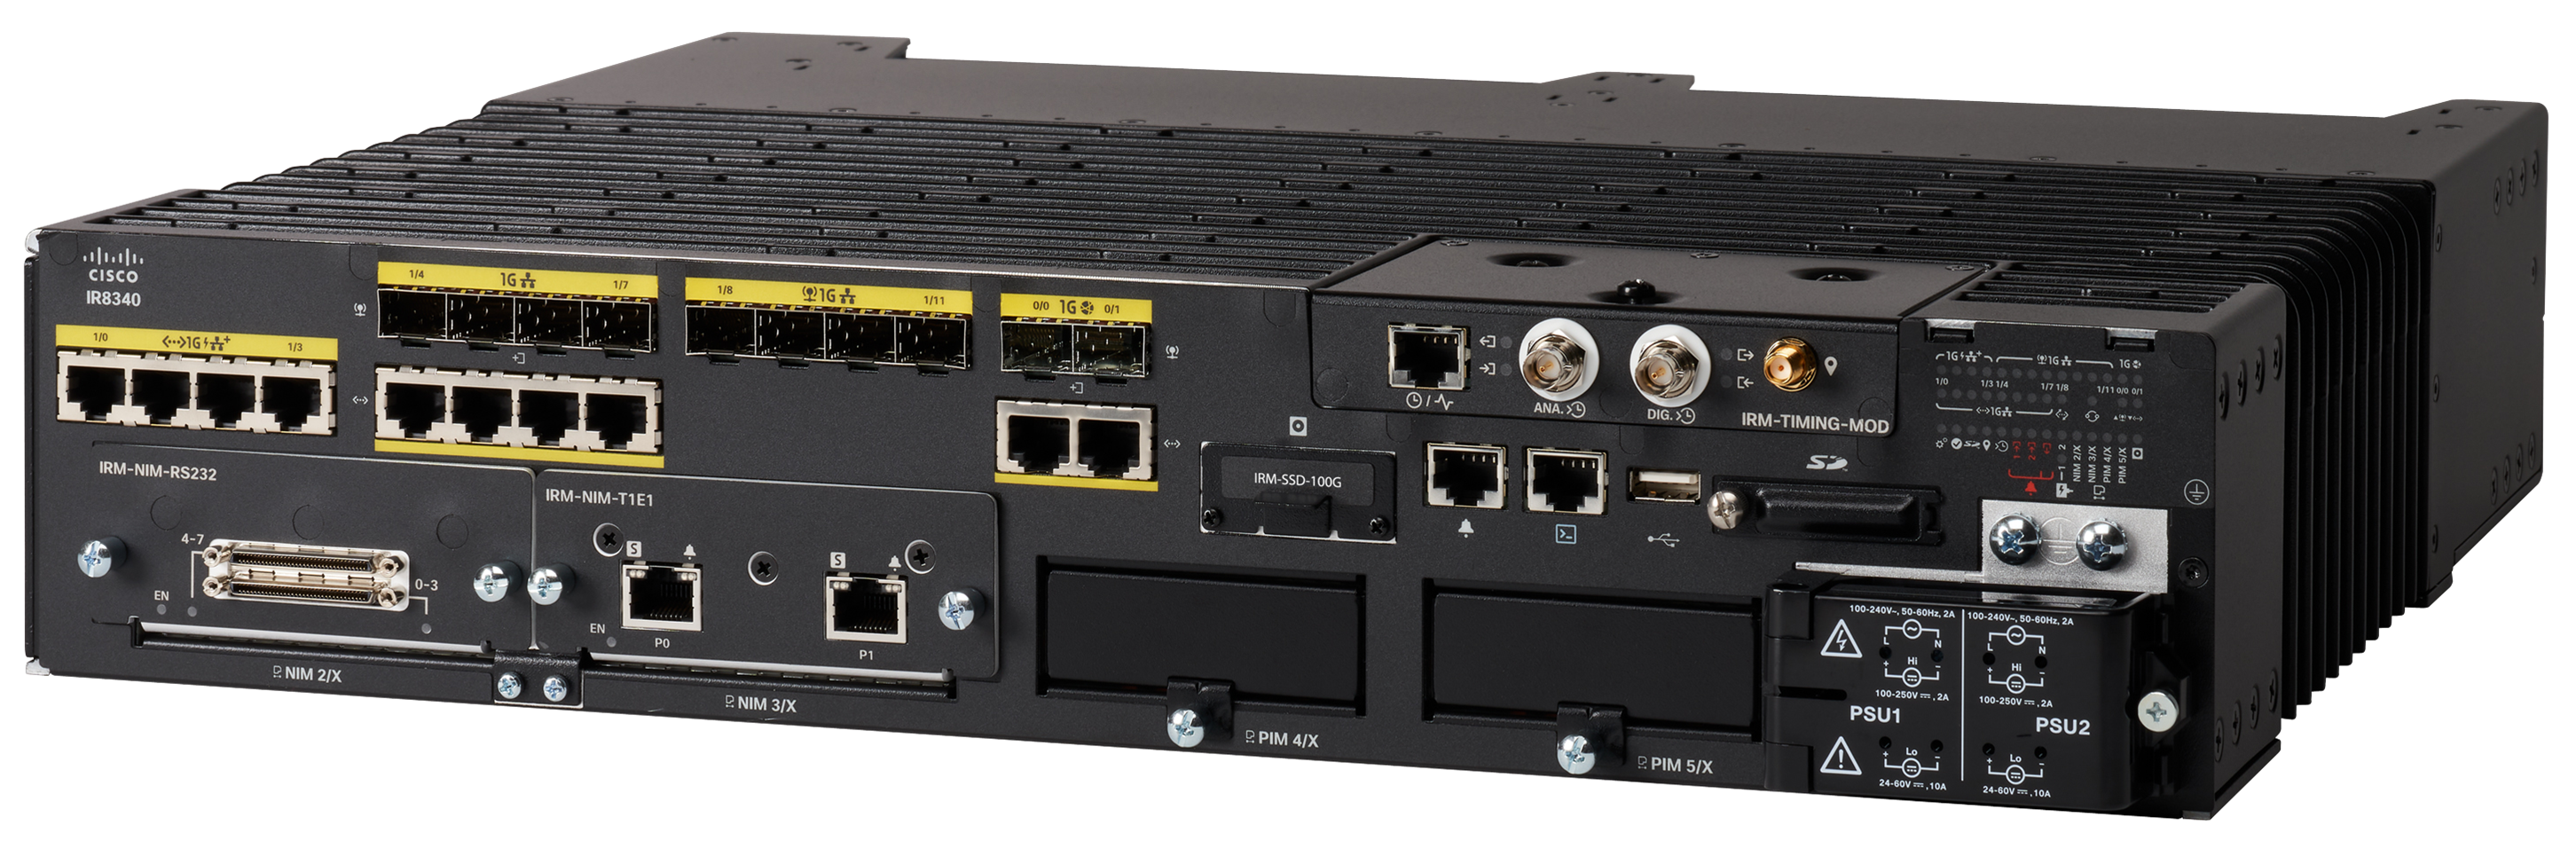 Cisco Catalyst® IR8300 Rugged Series Routers